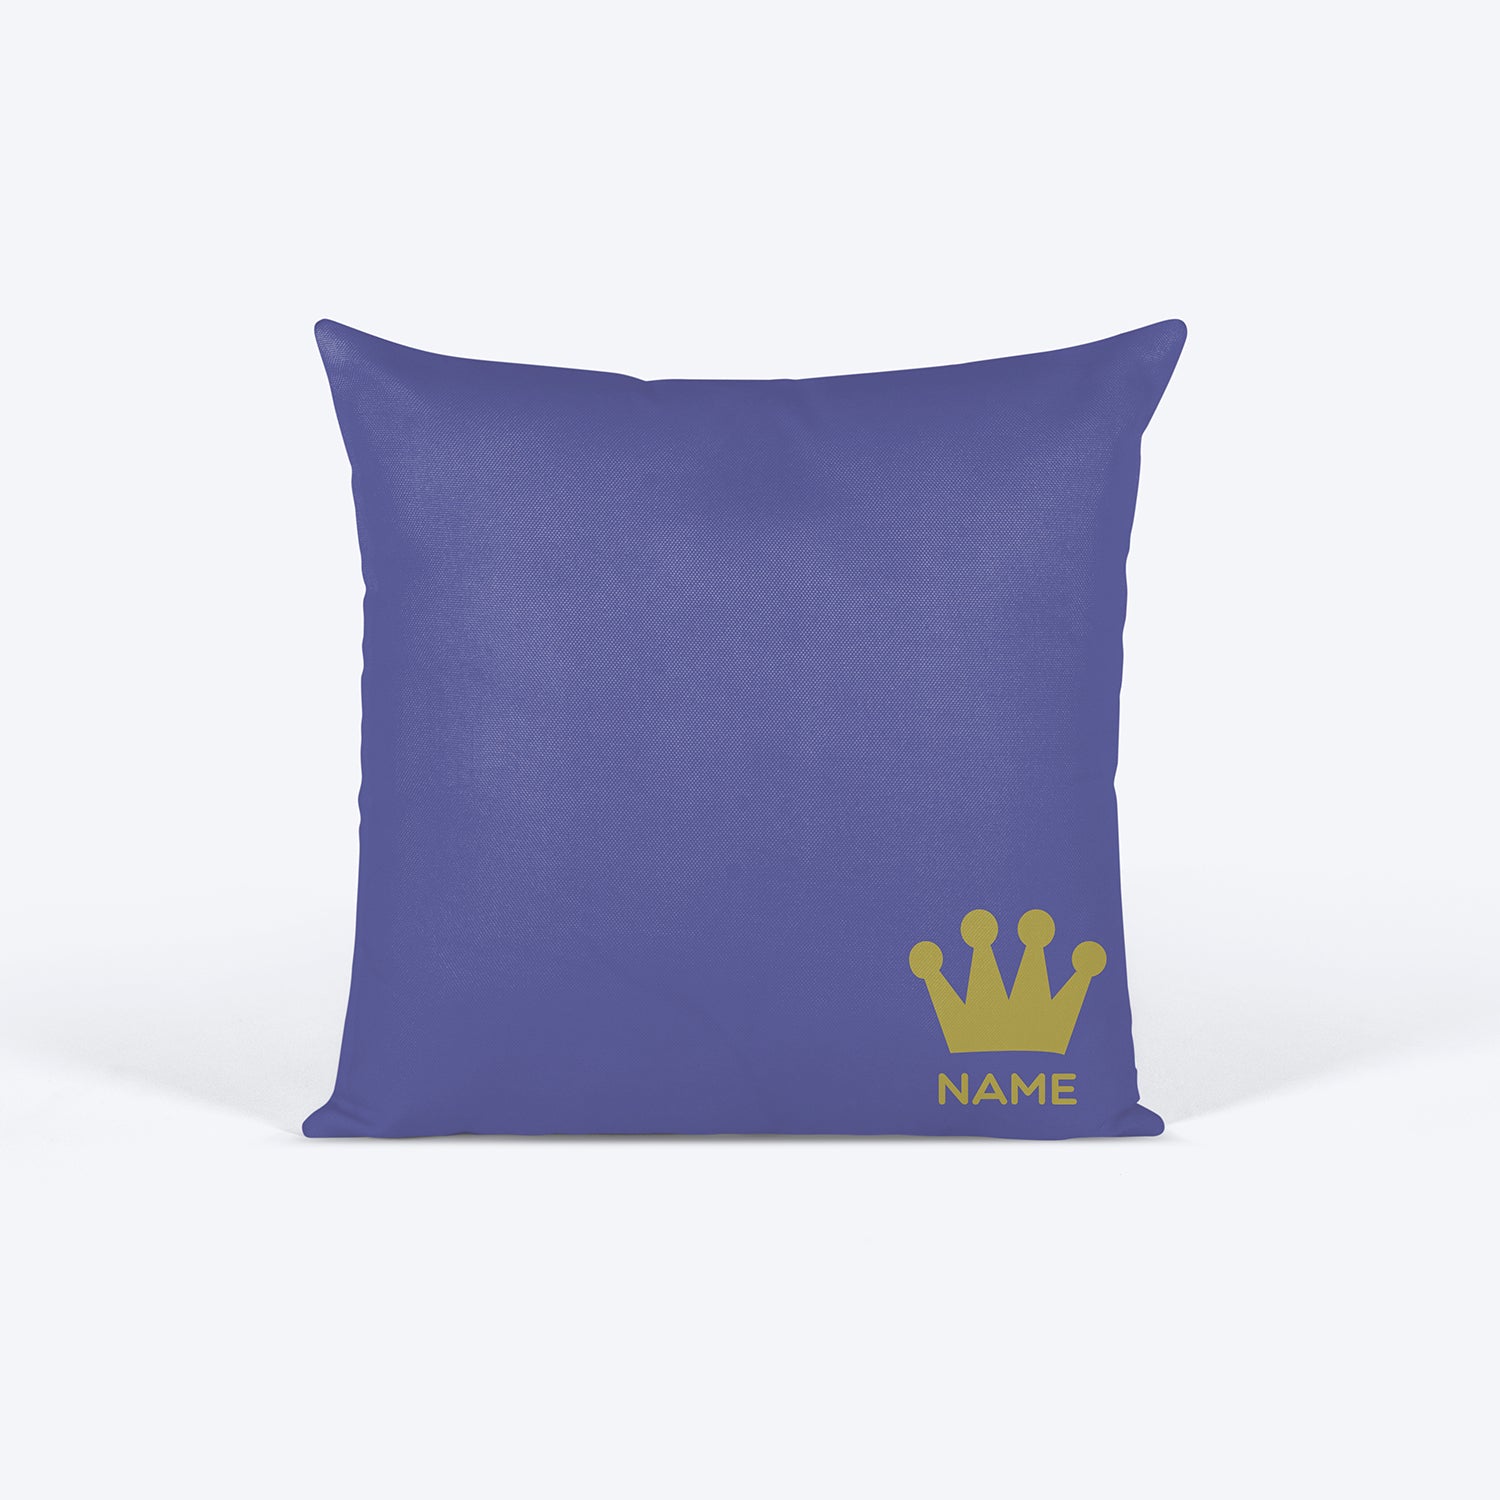 HUFT Crown Design Personalised Cushion - 12 inches (30 x 30 cm) - Heads Up For Tails